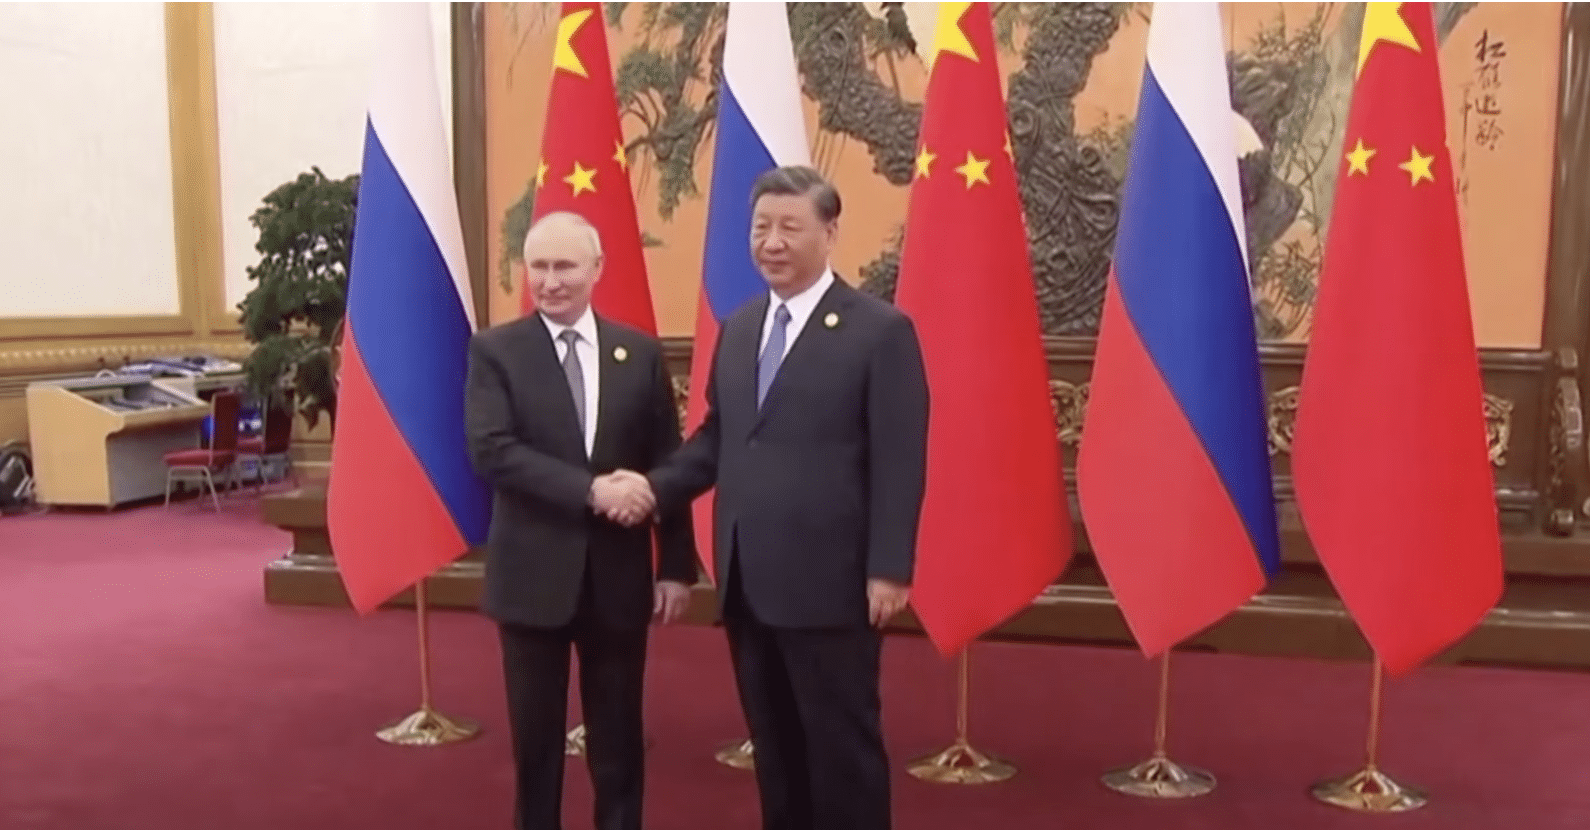 Putin and Xi Outline vision of a New World Order